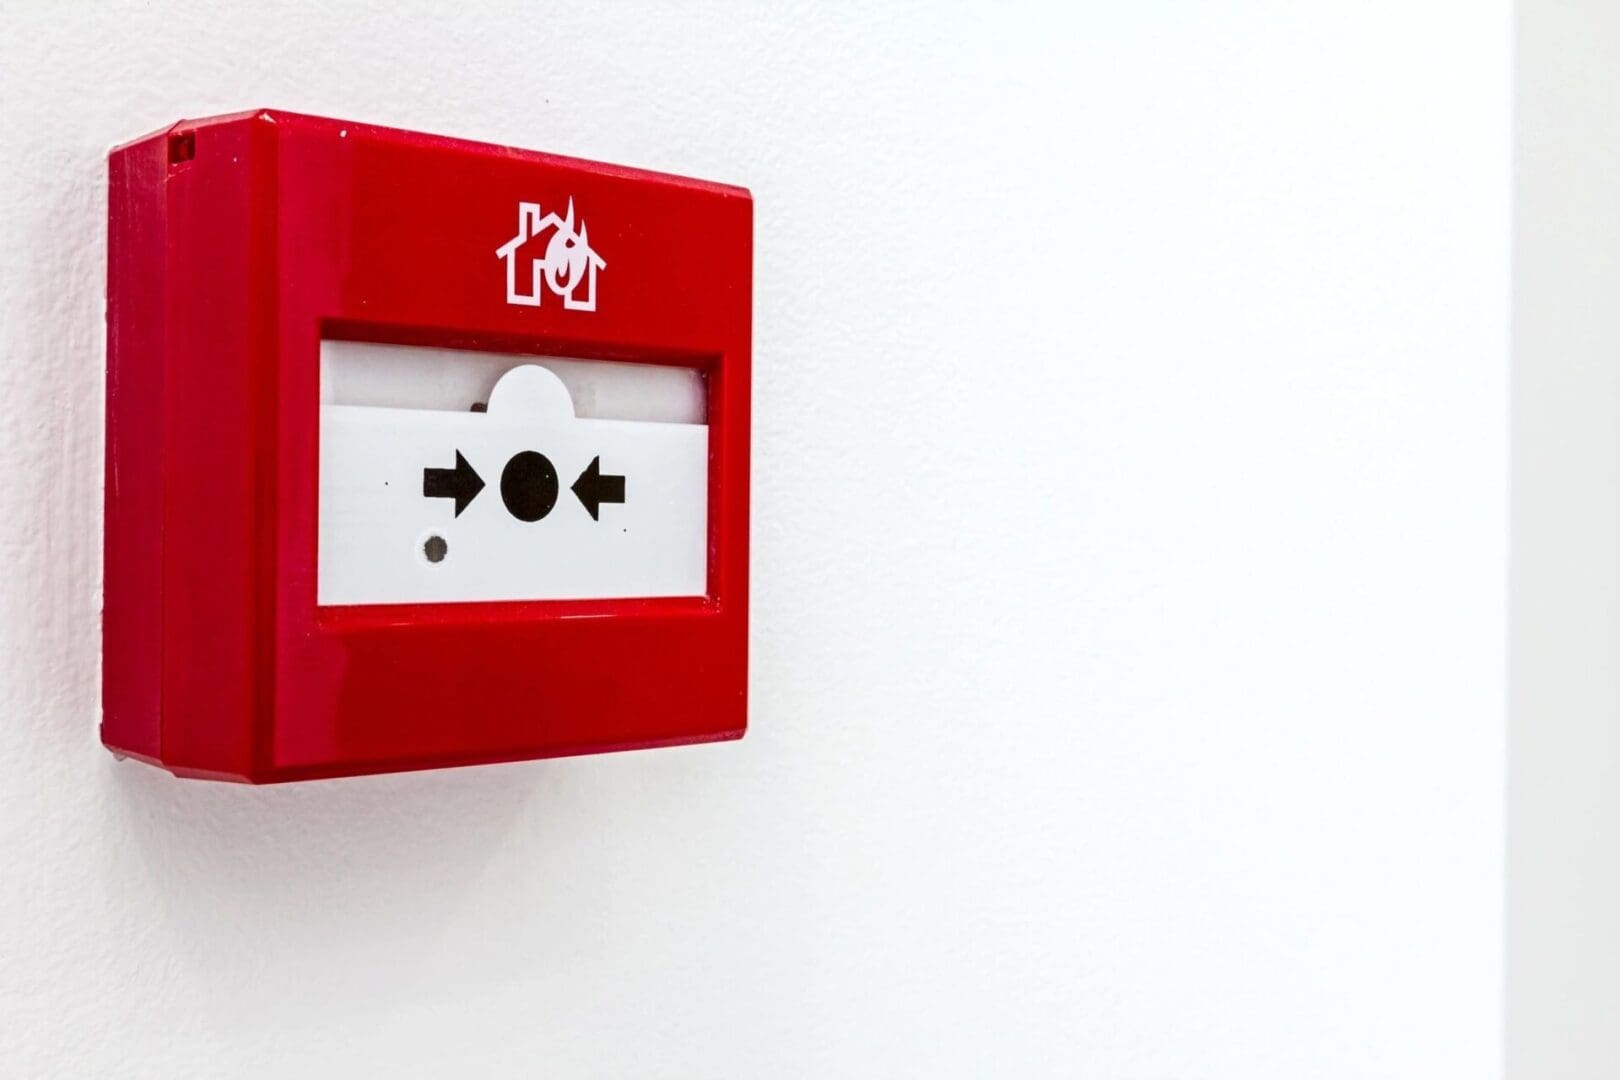 A red fire alarm box on the wall